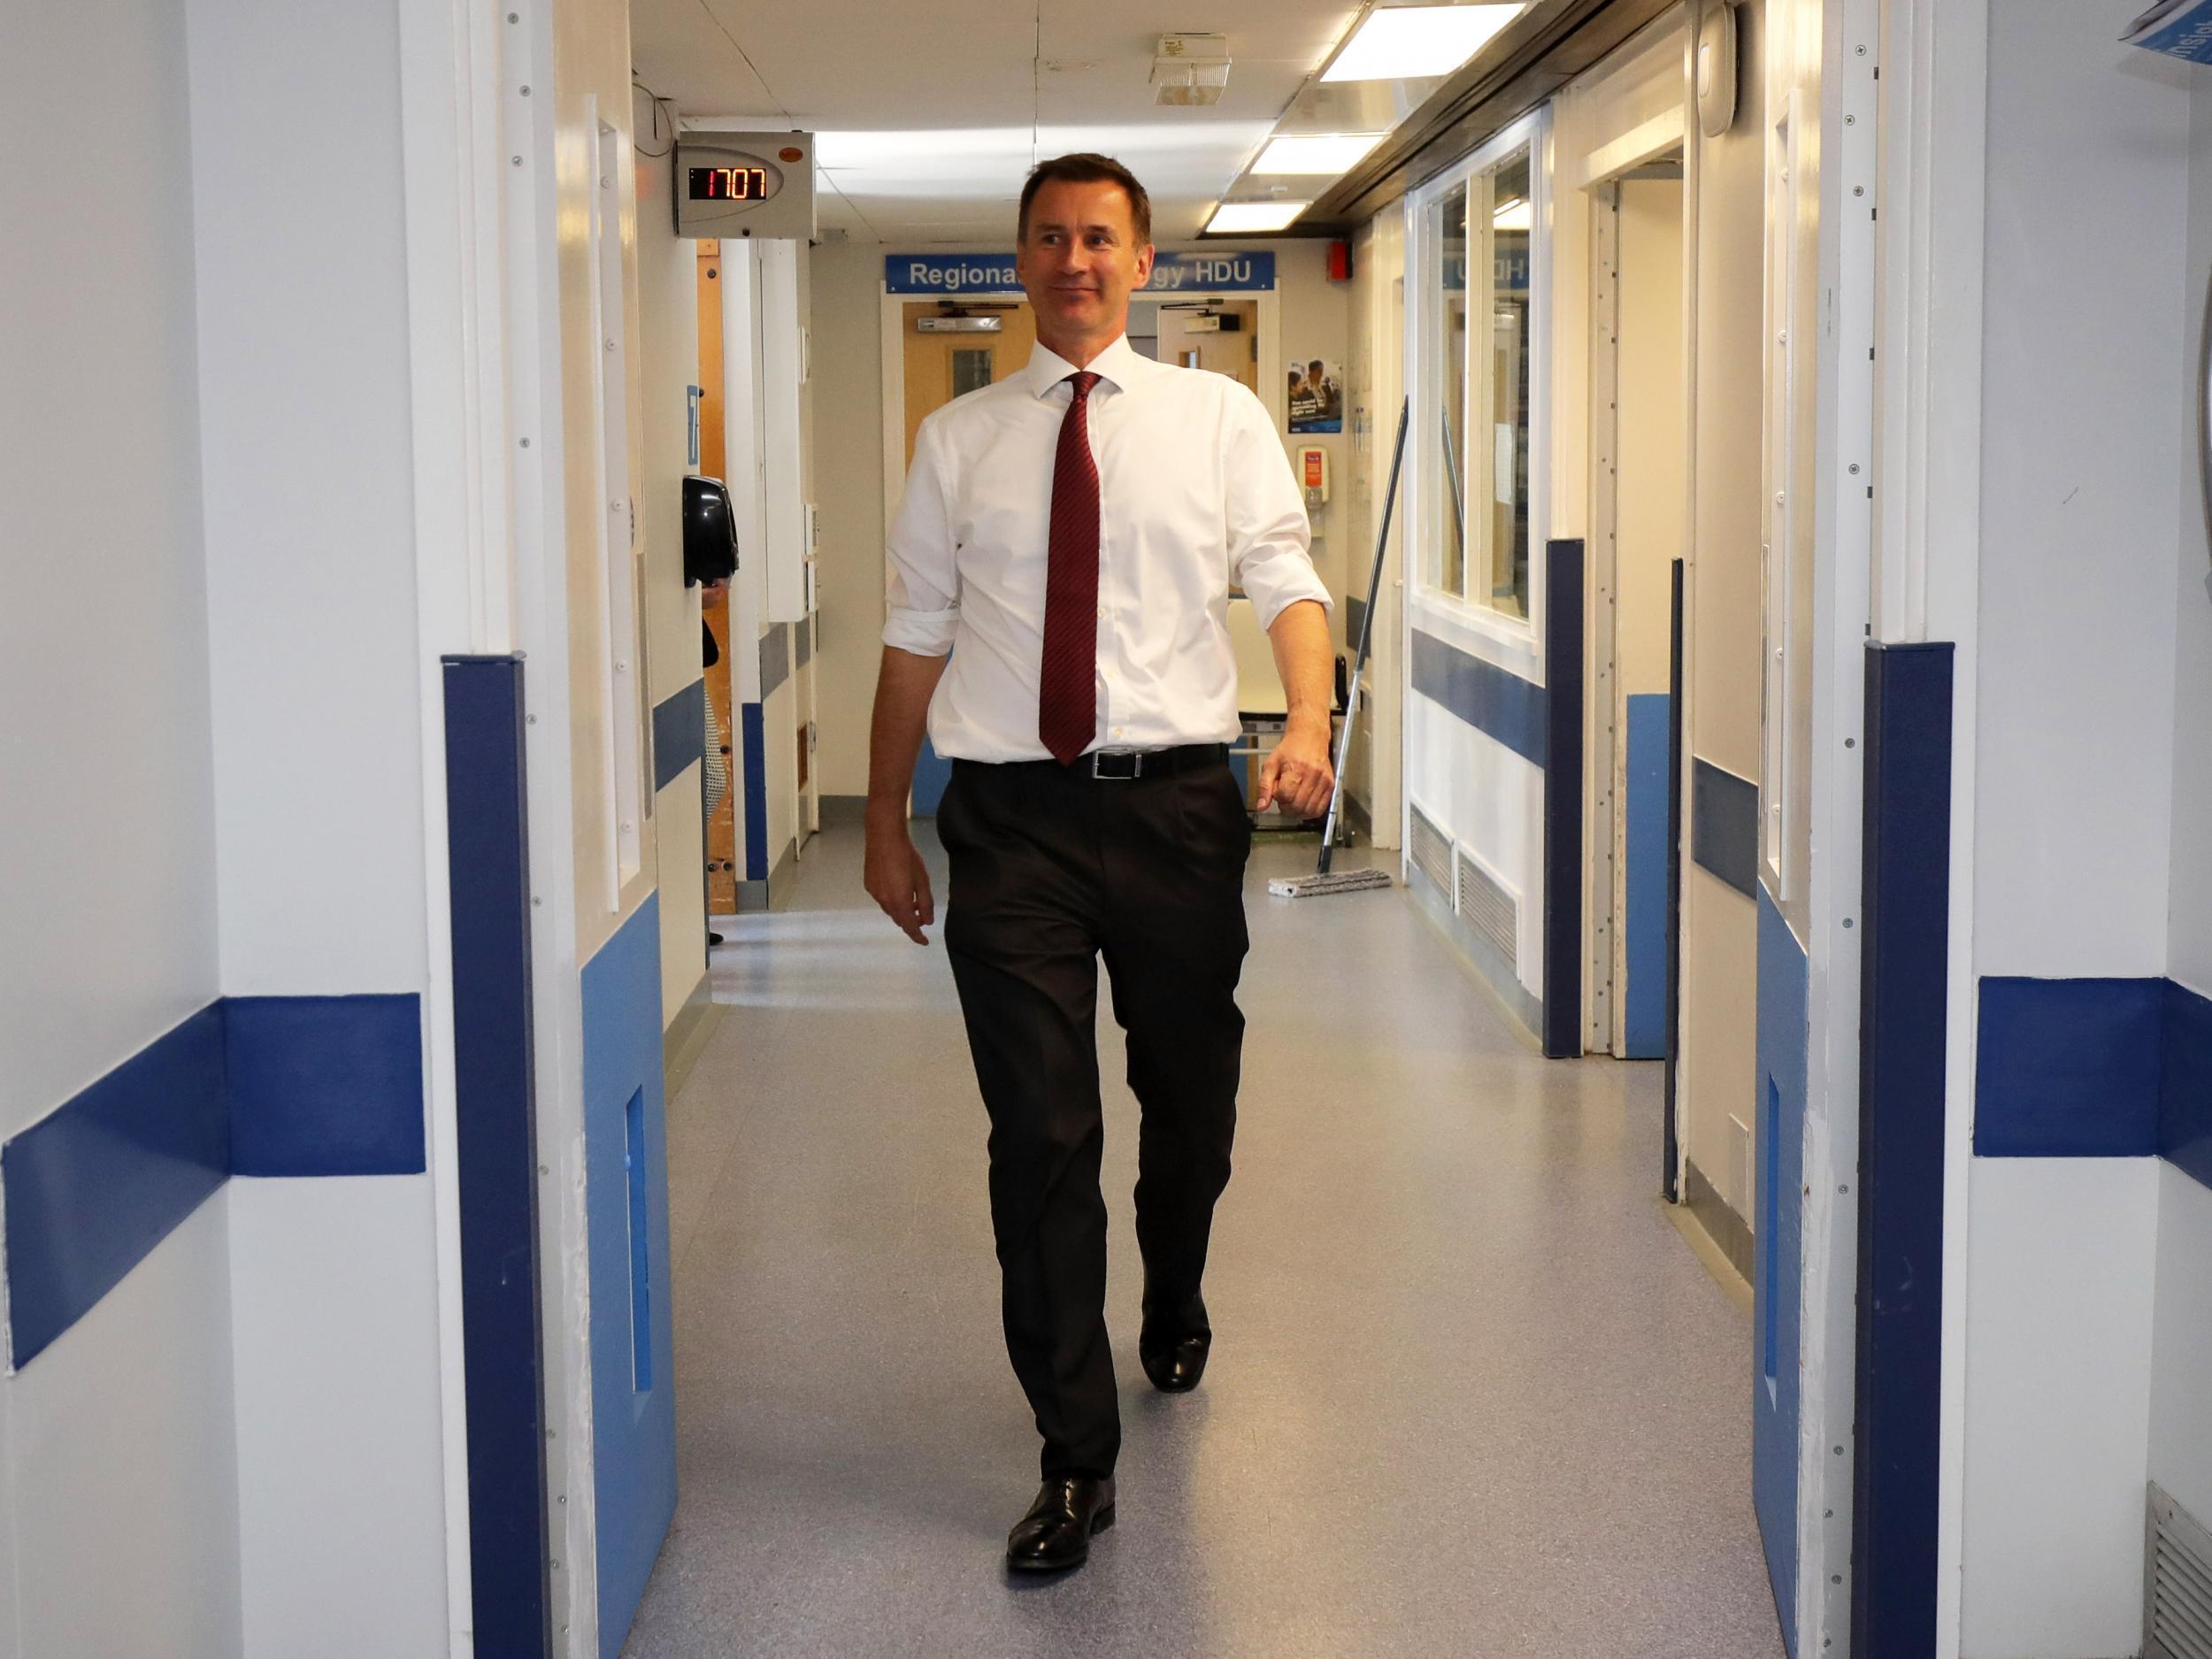 Jeremy Hunt has waged a clever campaign for more cash